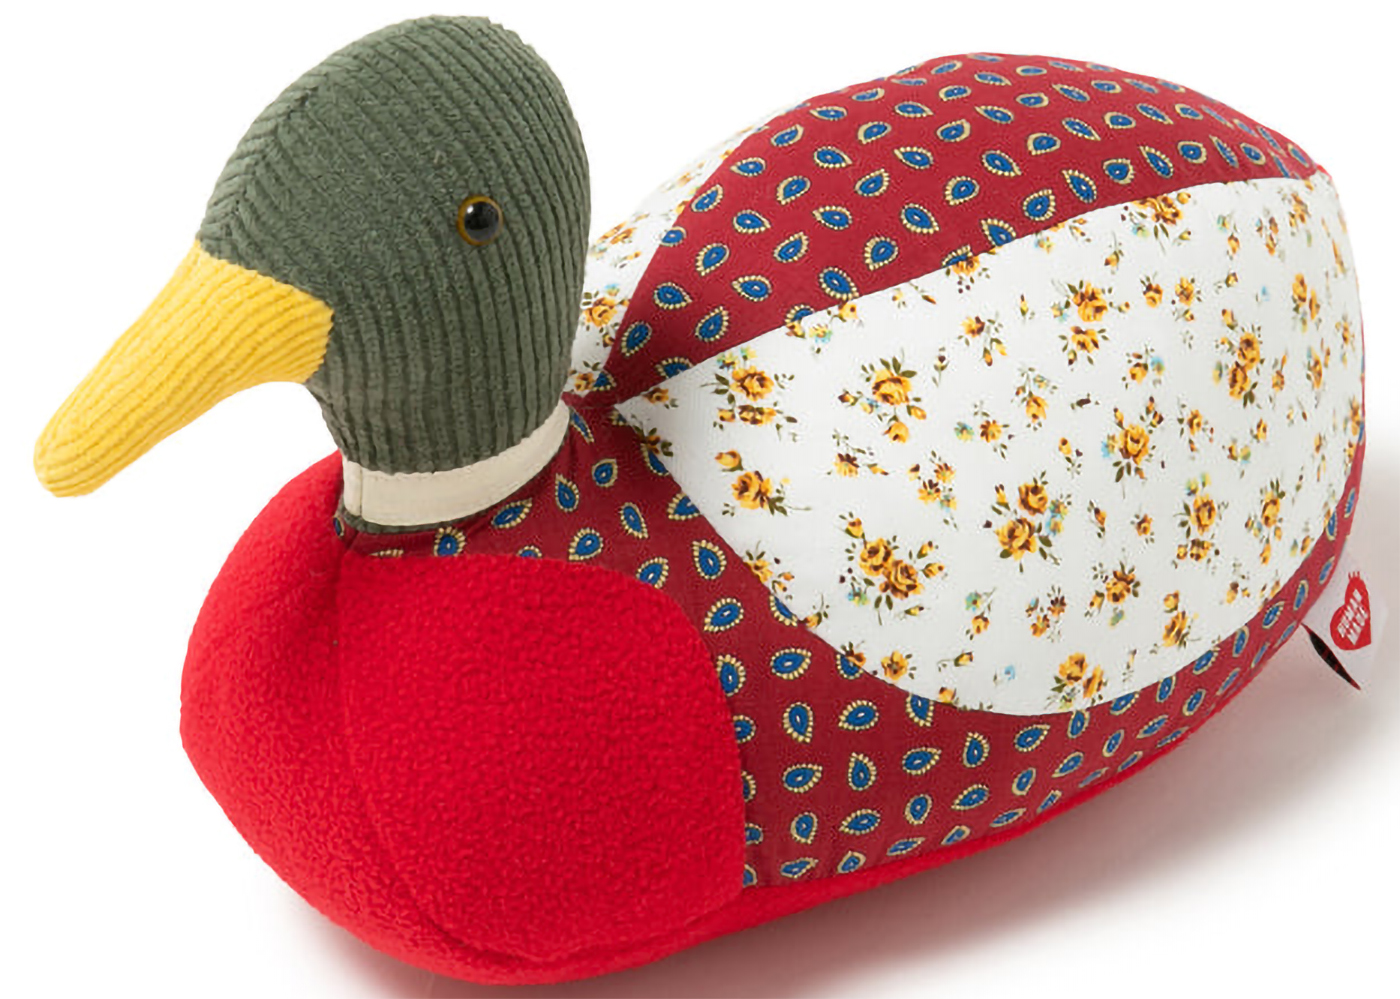 human made PATCHWORK DUCK PLUSH DOLL